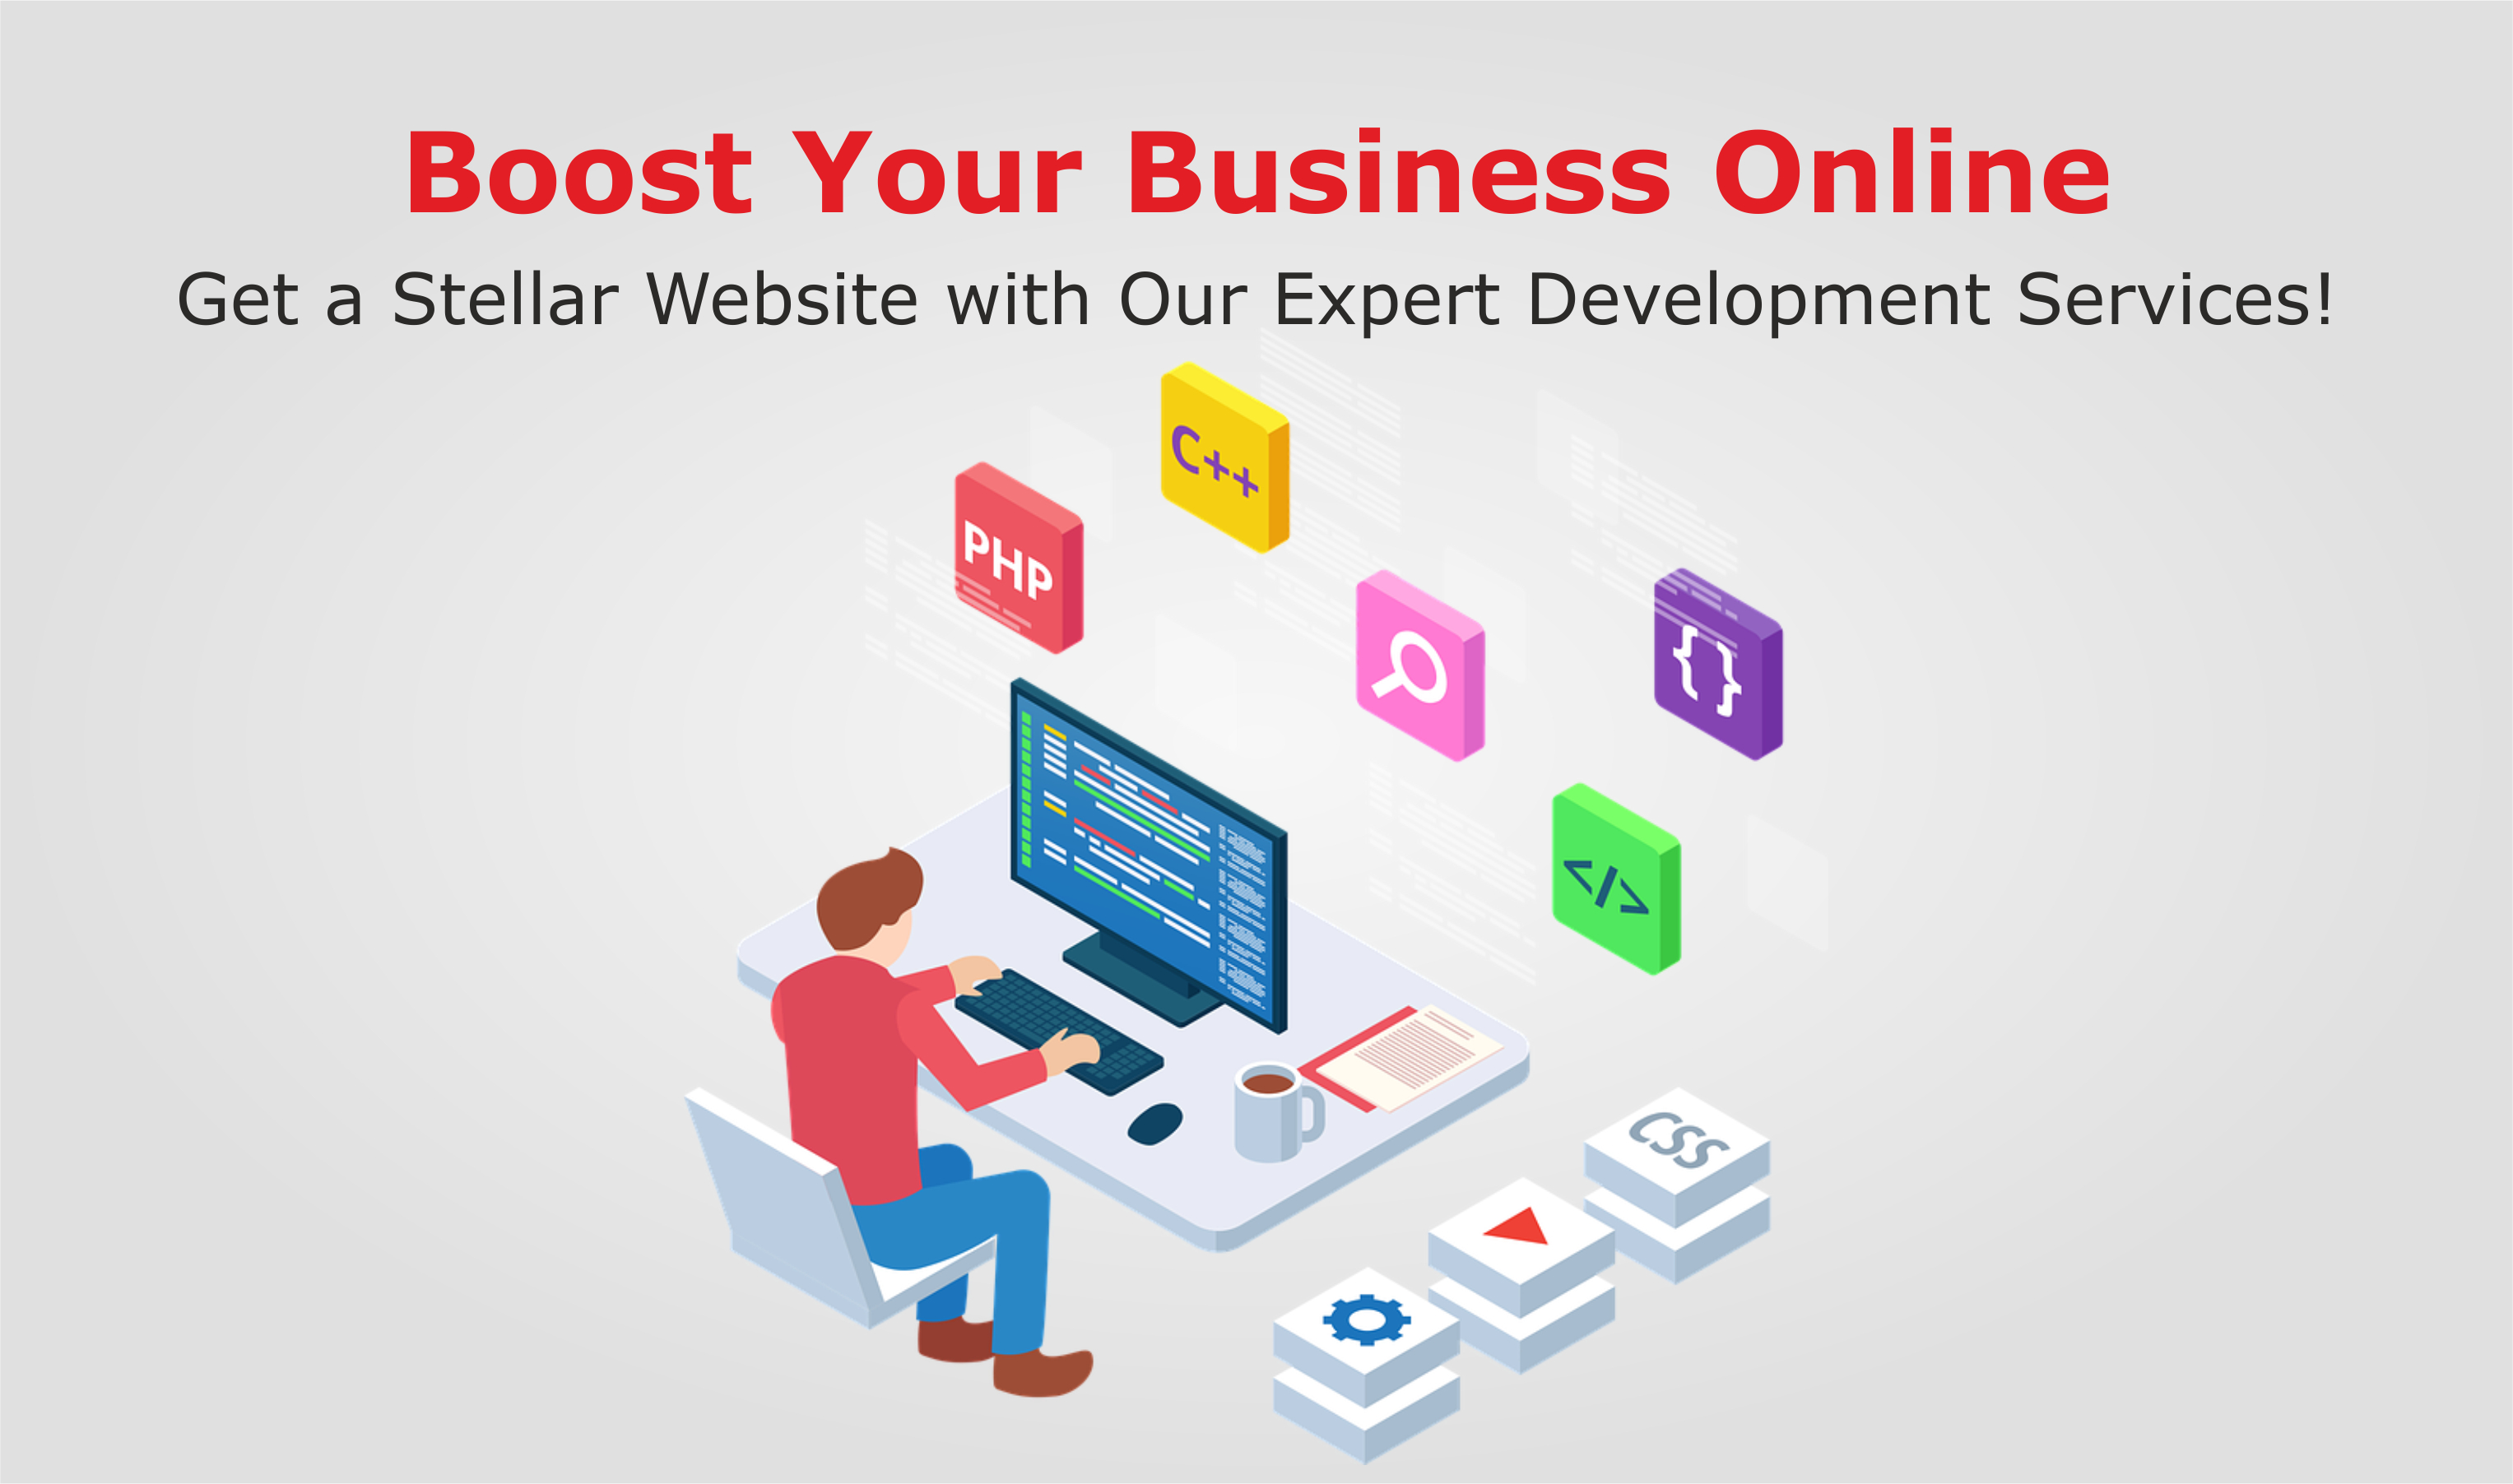 Boost Your Business Online: Get a Stellar Website with Our Expert Development Services!